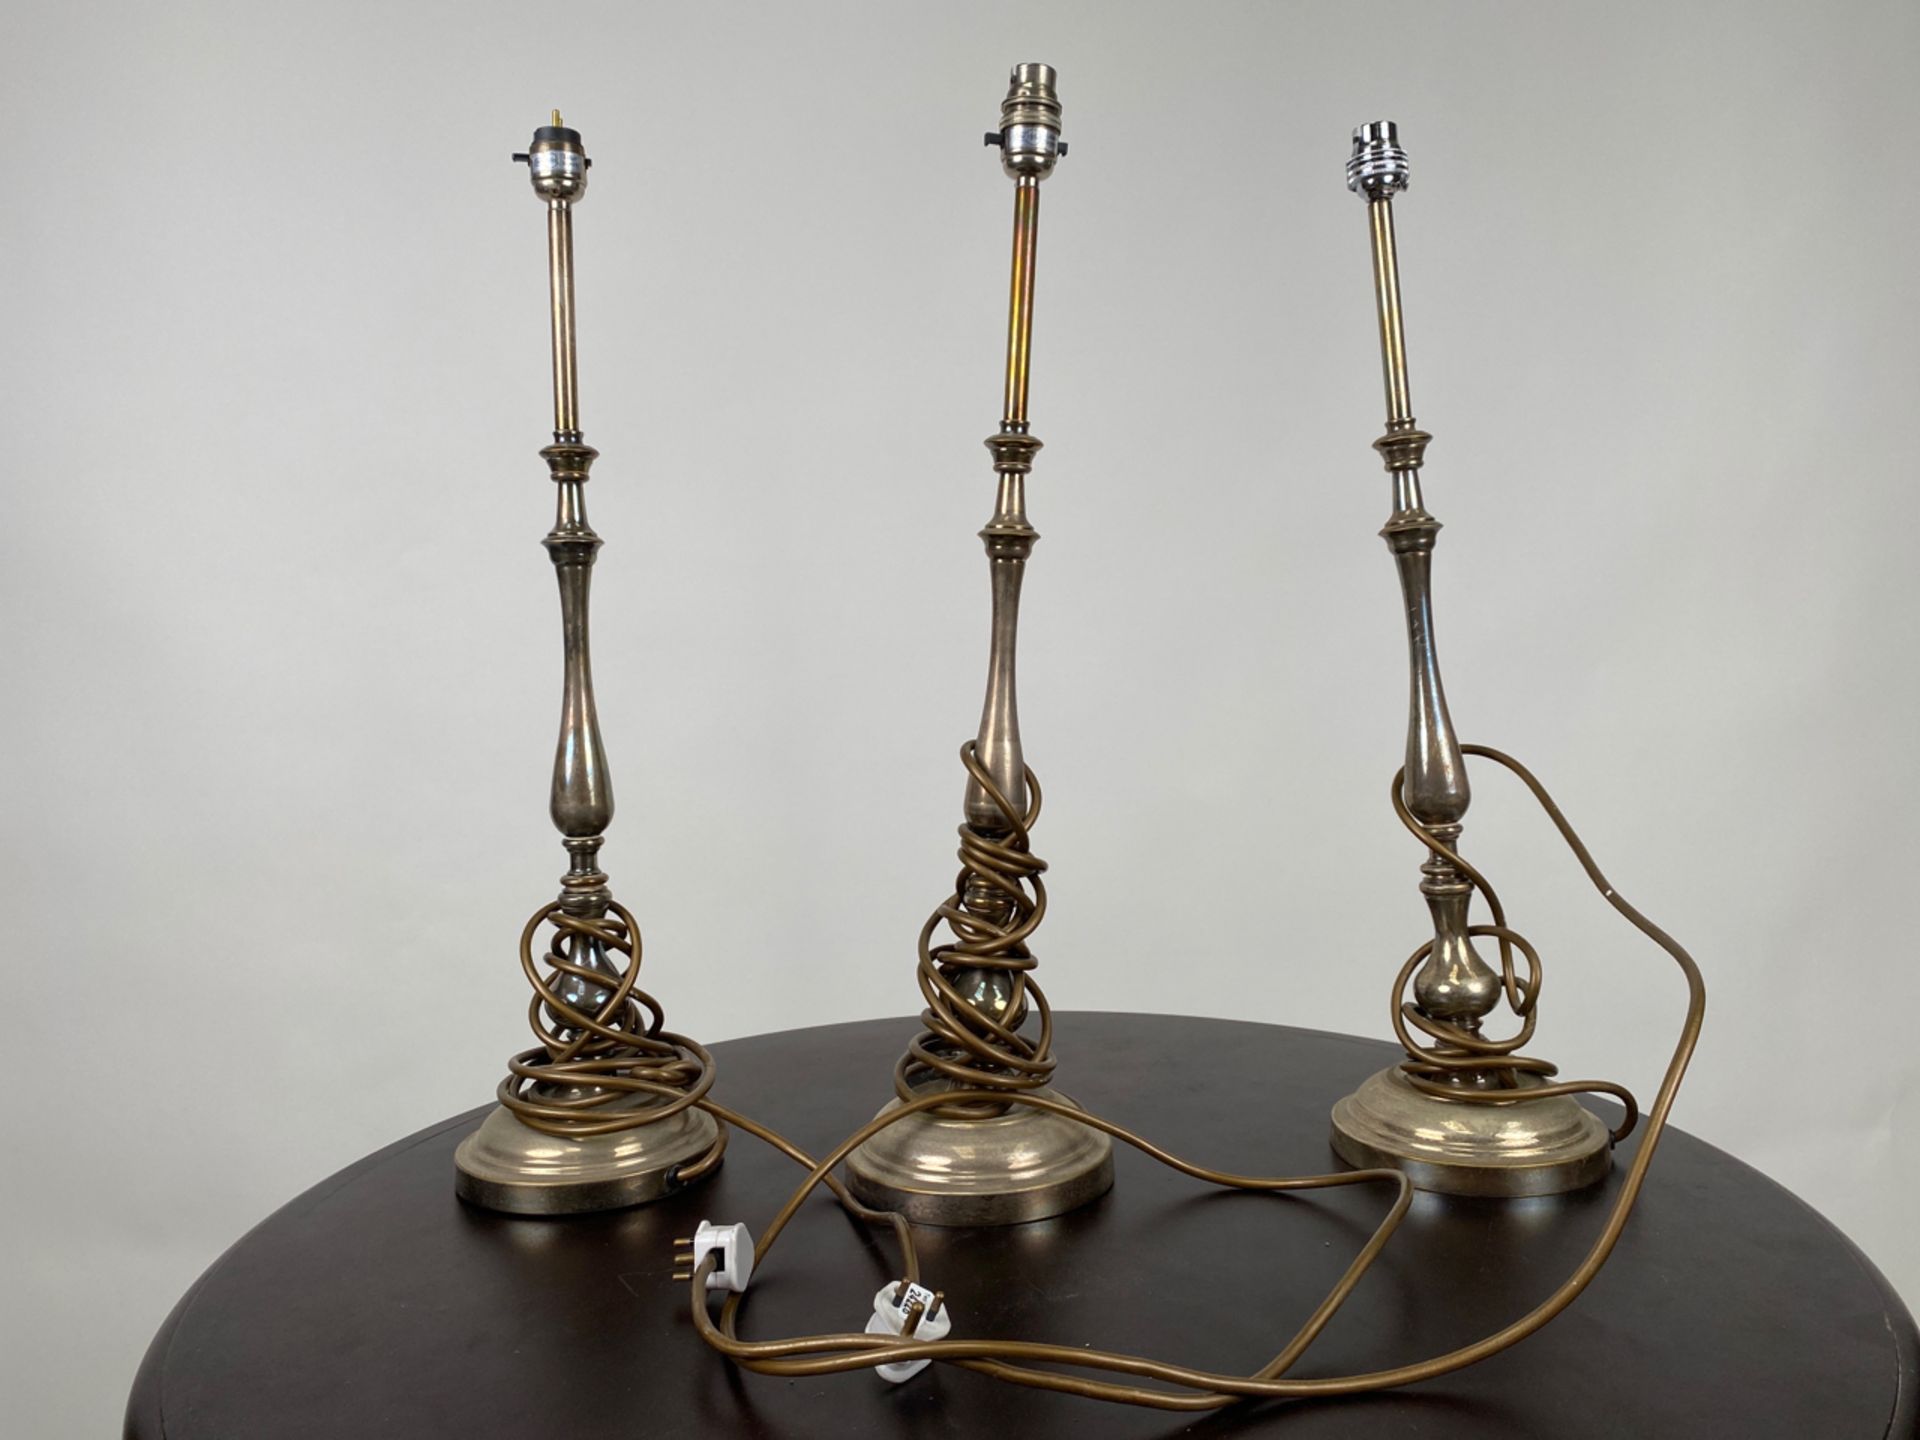 Trio of Silver Plated Table Lamps